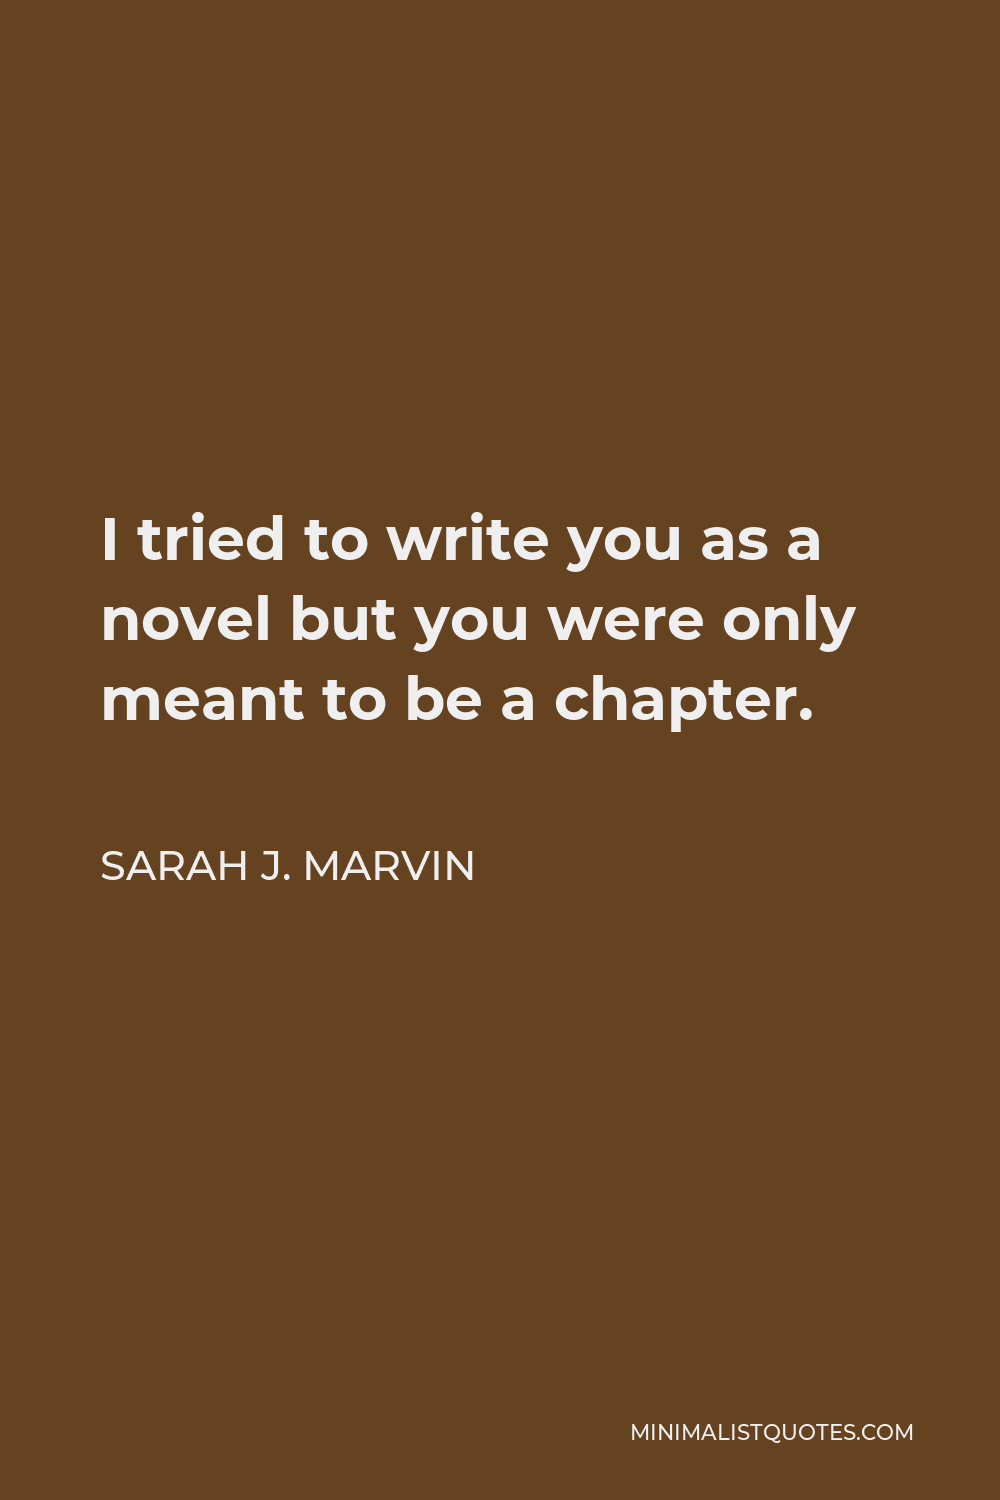 Sarah J. Marvin Quote - I tried to write you as a novel but you were only meant to be a chapter.